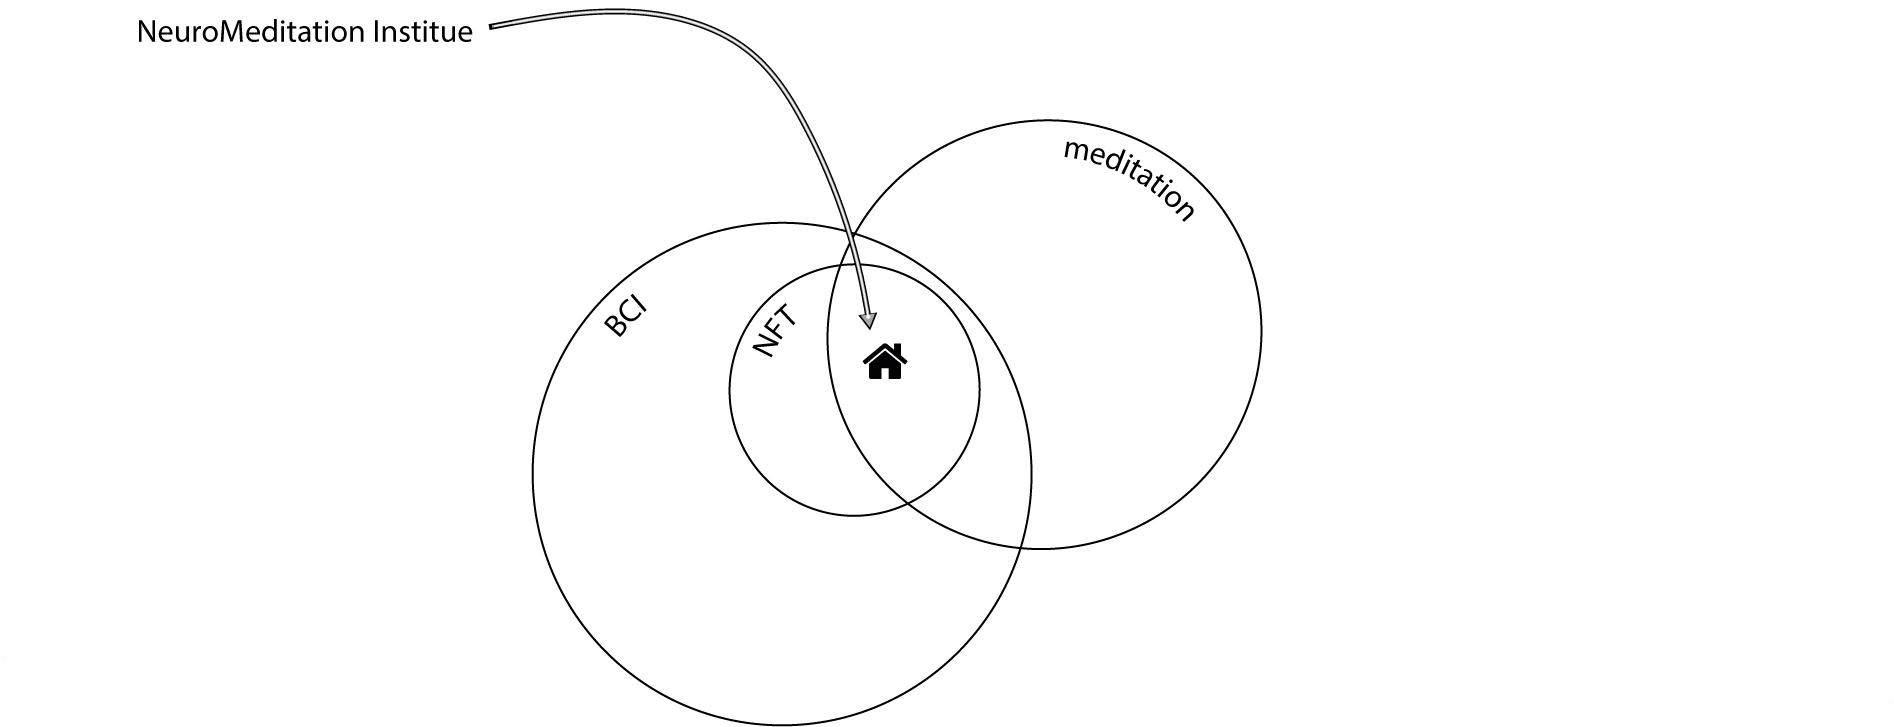 Venn diagram locating the NeuroMeditation Institute in the intersection of the domains of NFT and meditation.